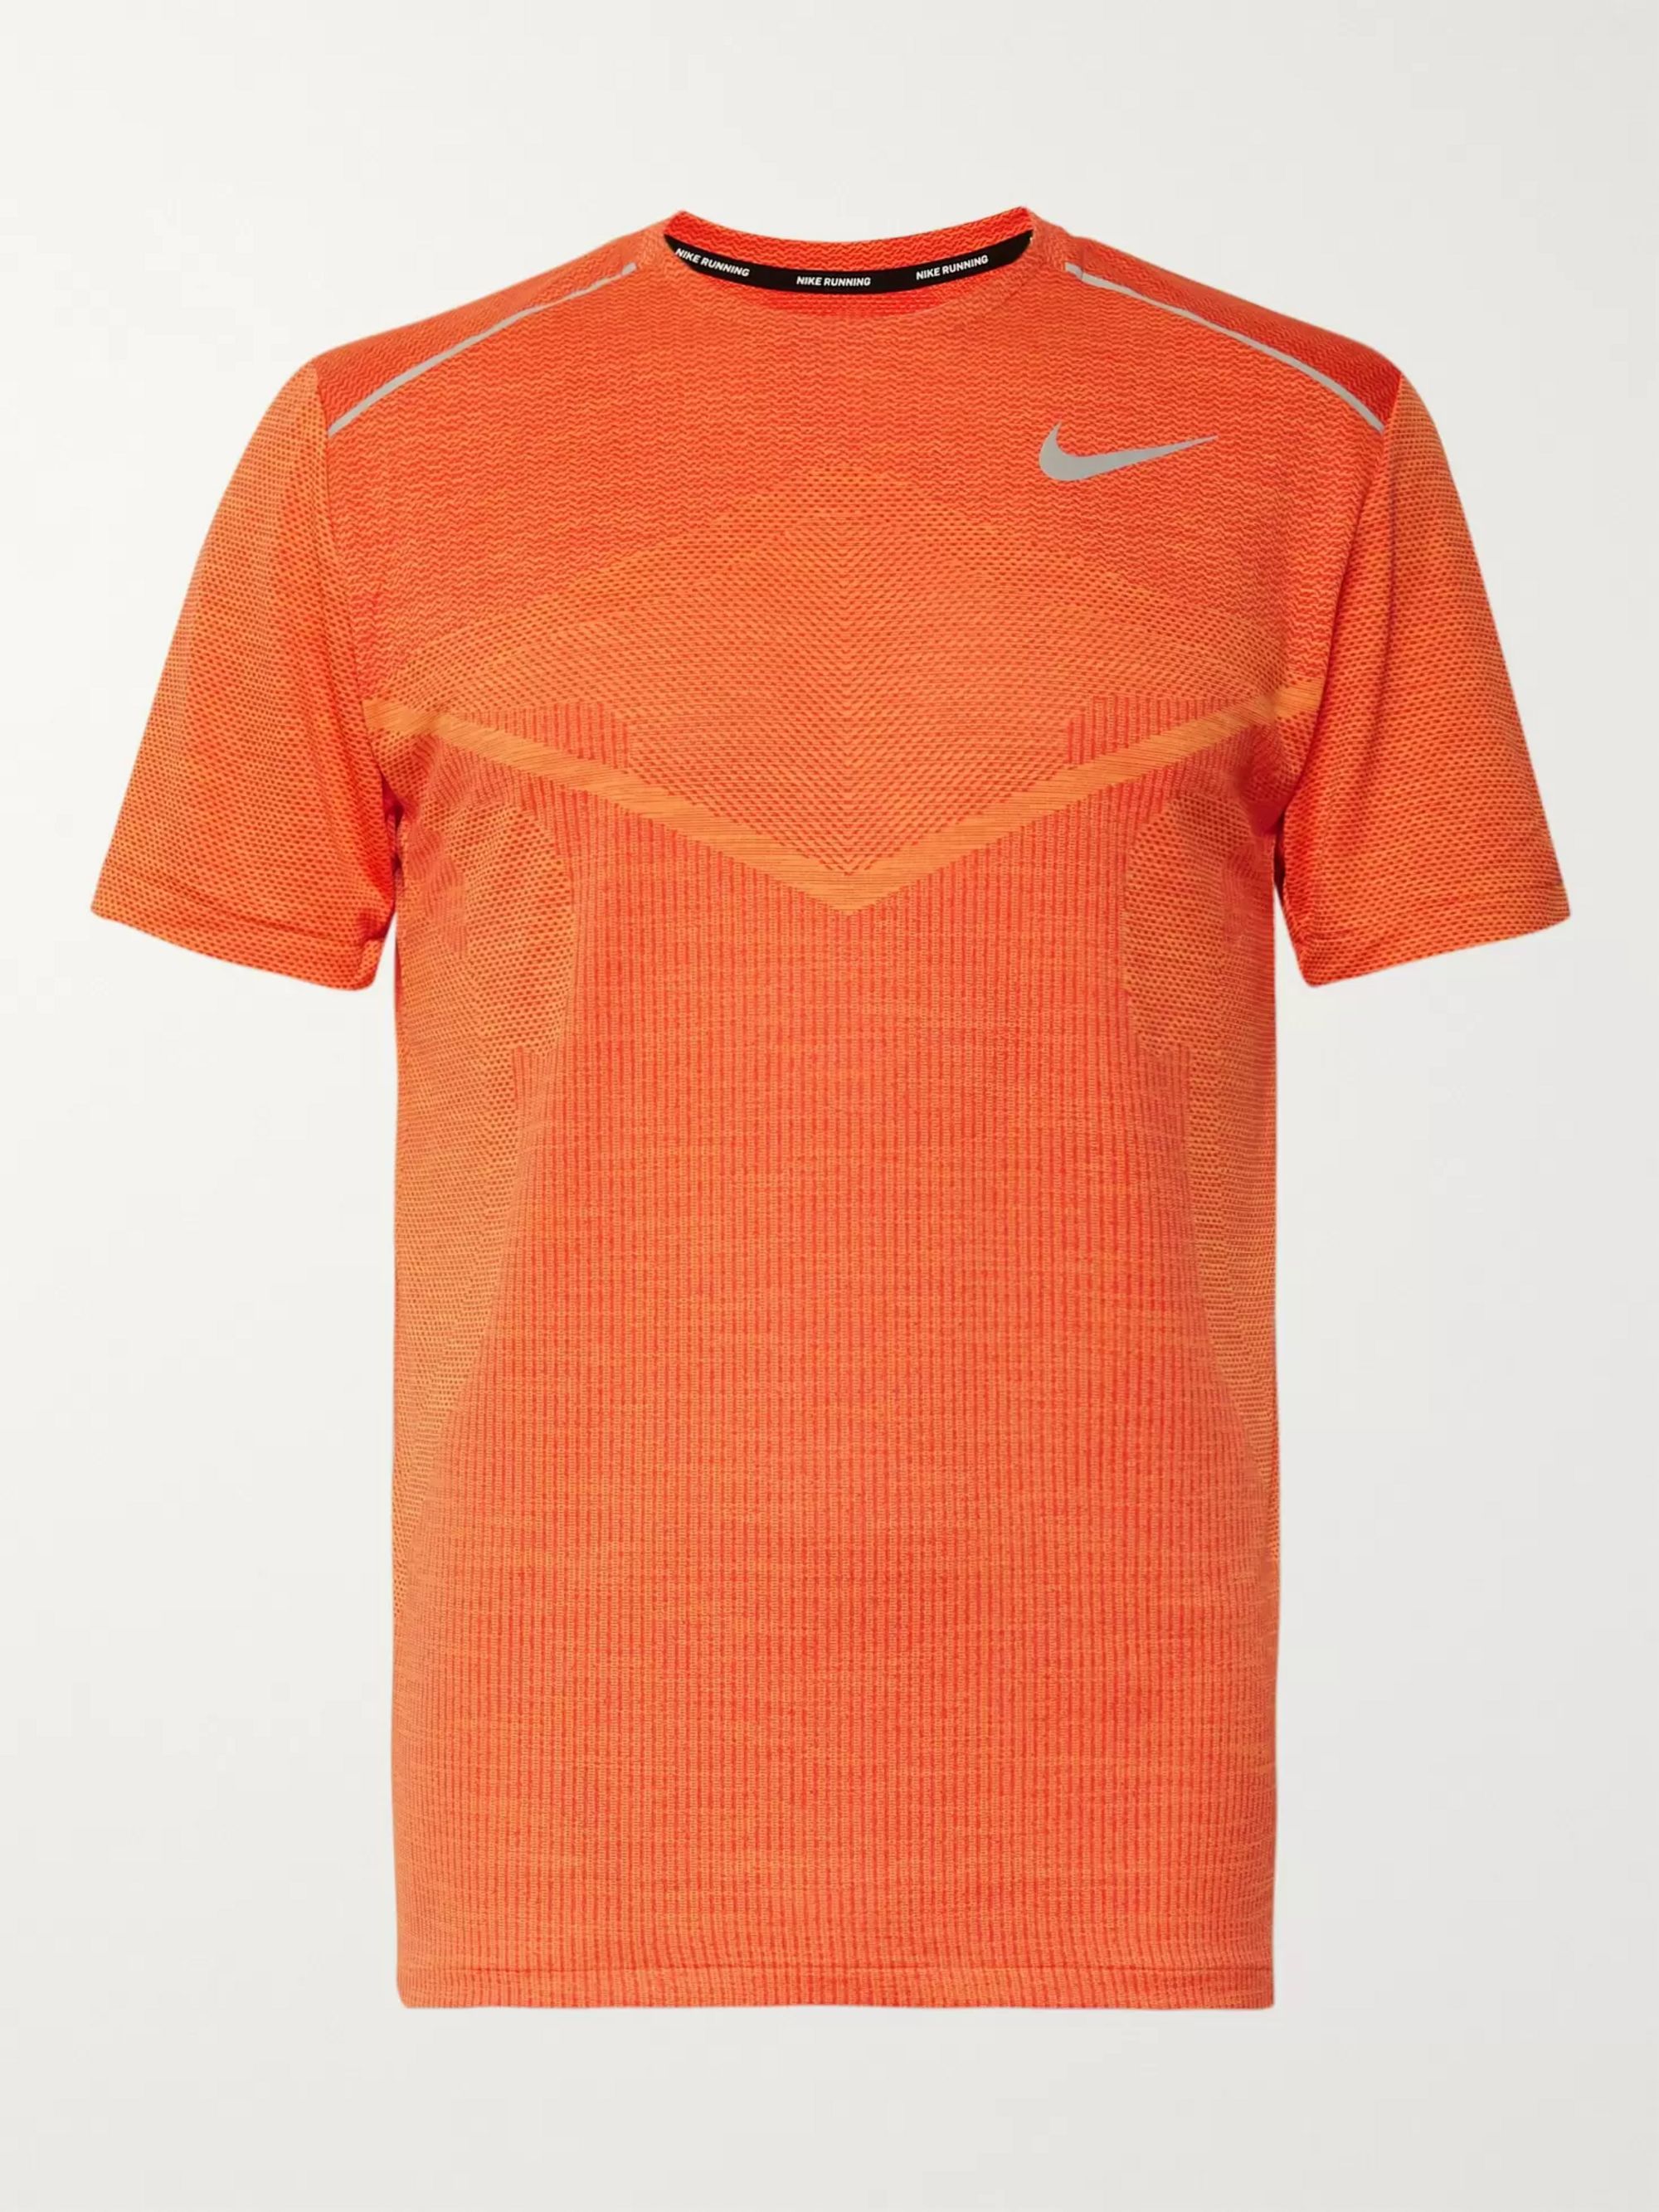 Nike Sport T Shirt Sale Up To 51 Discounts